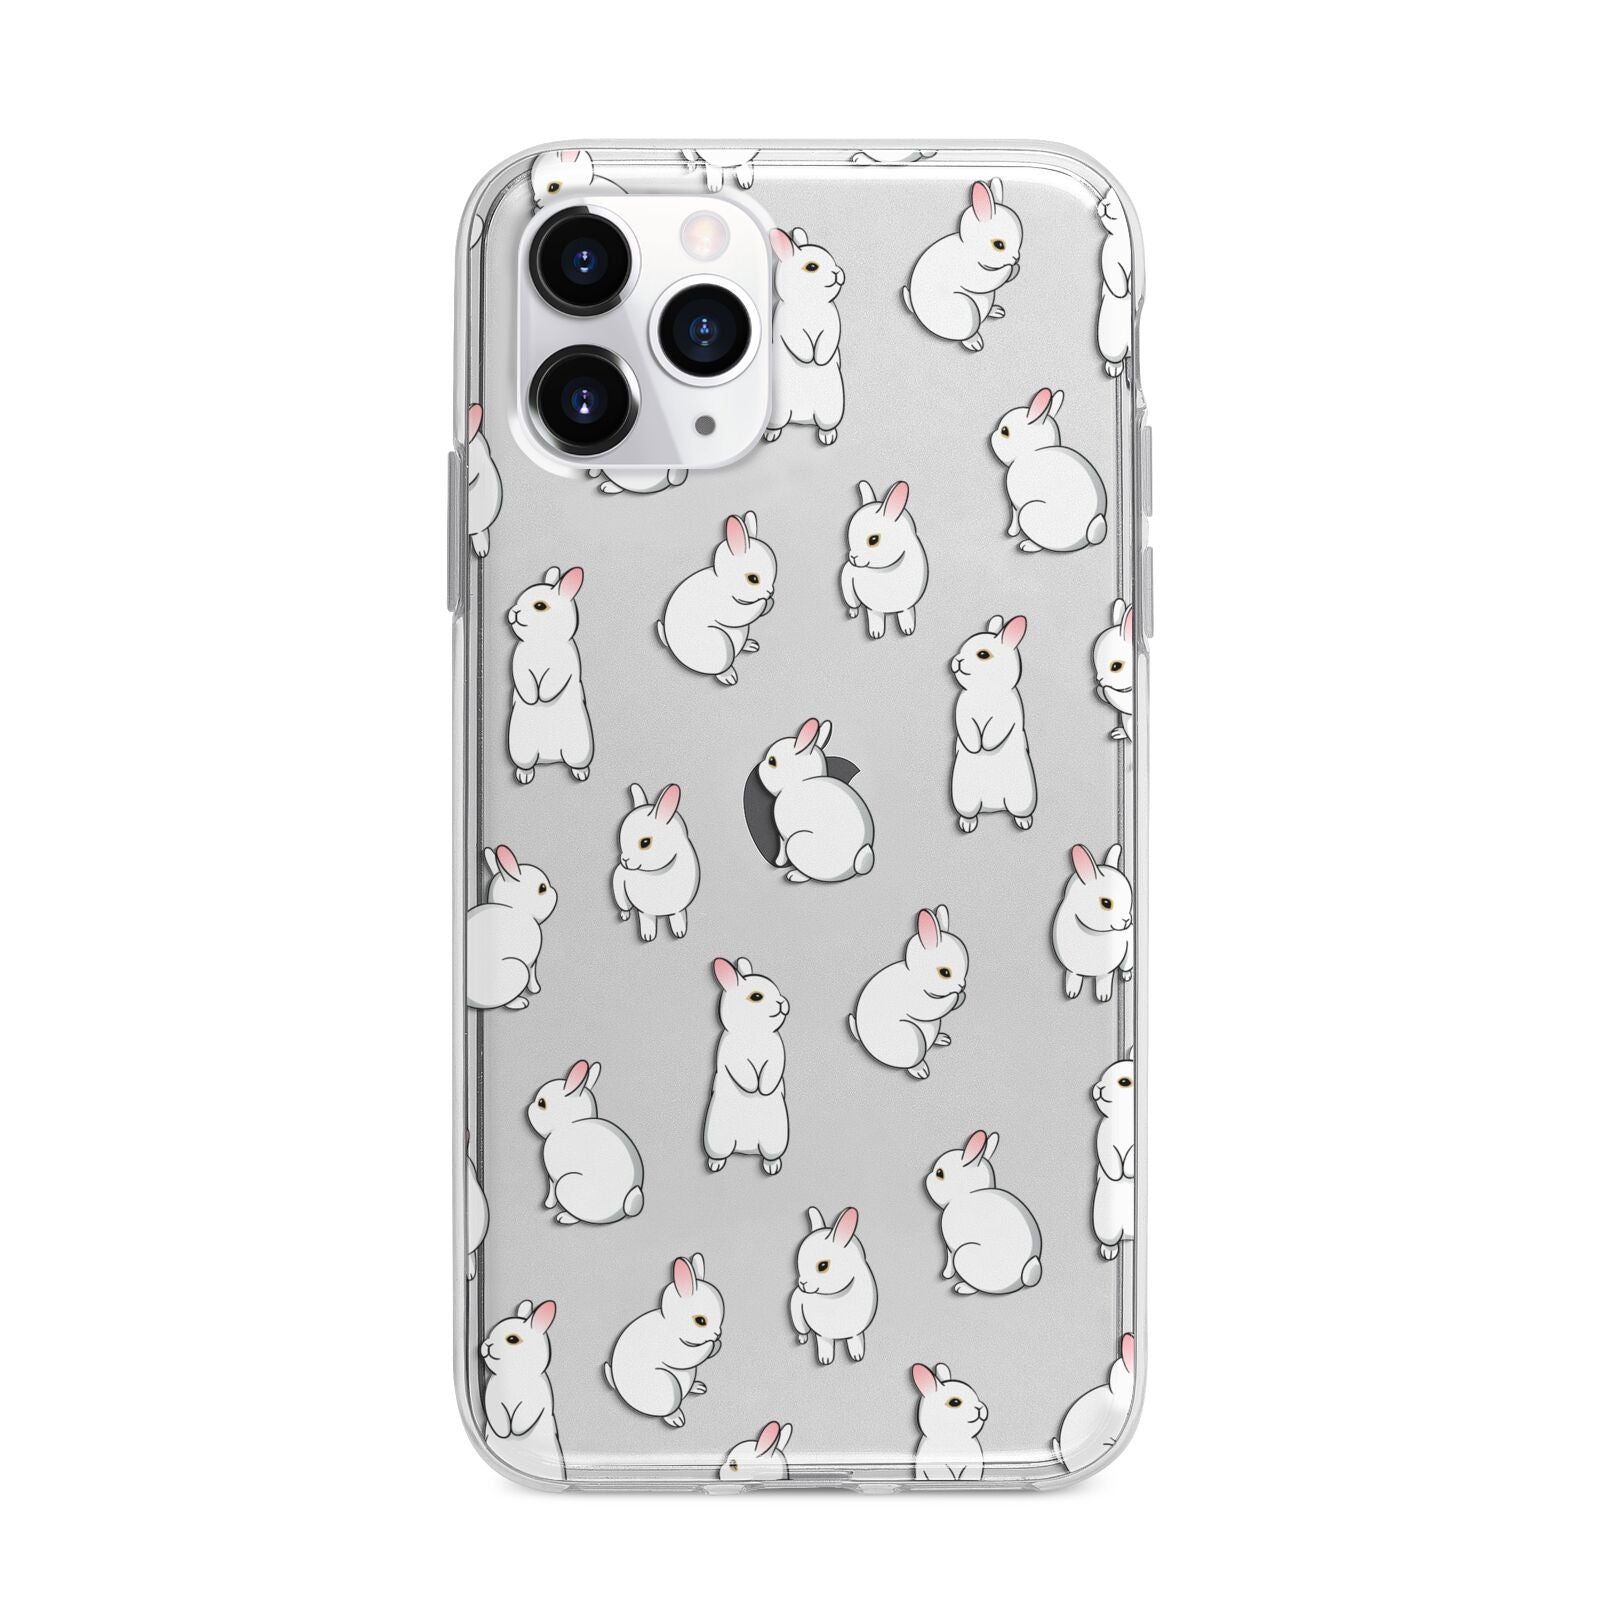 Bunny Rabbit Apple iPhone 11 Pro Max in Silver with Bumper Case